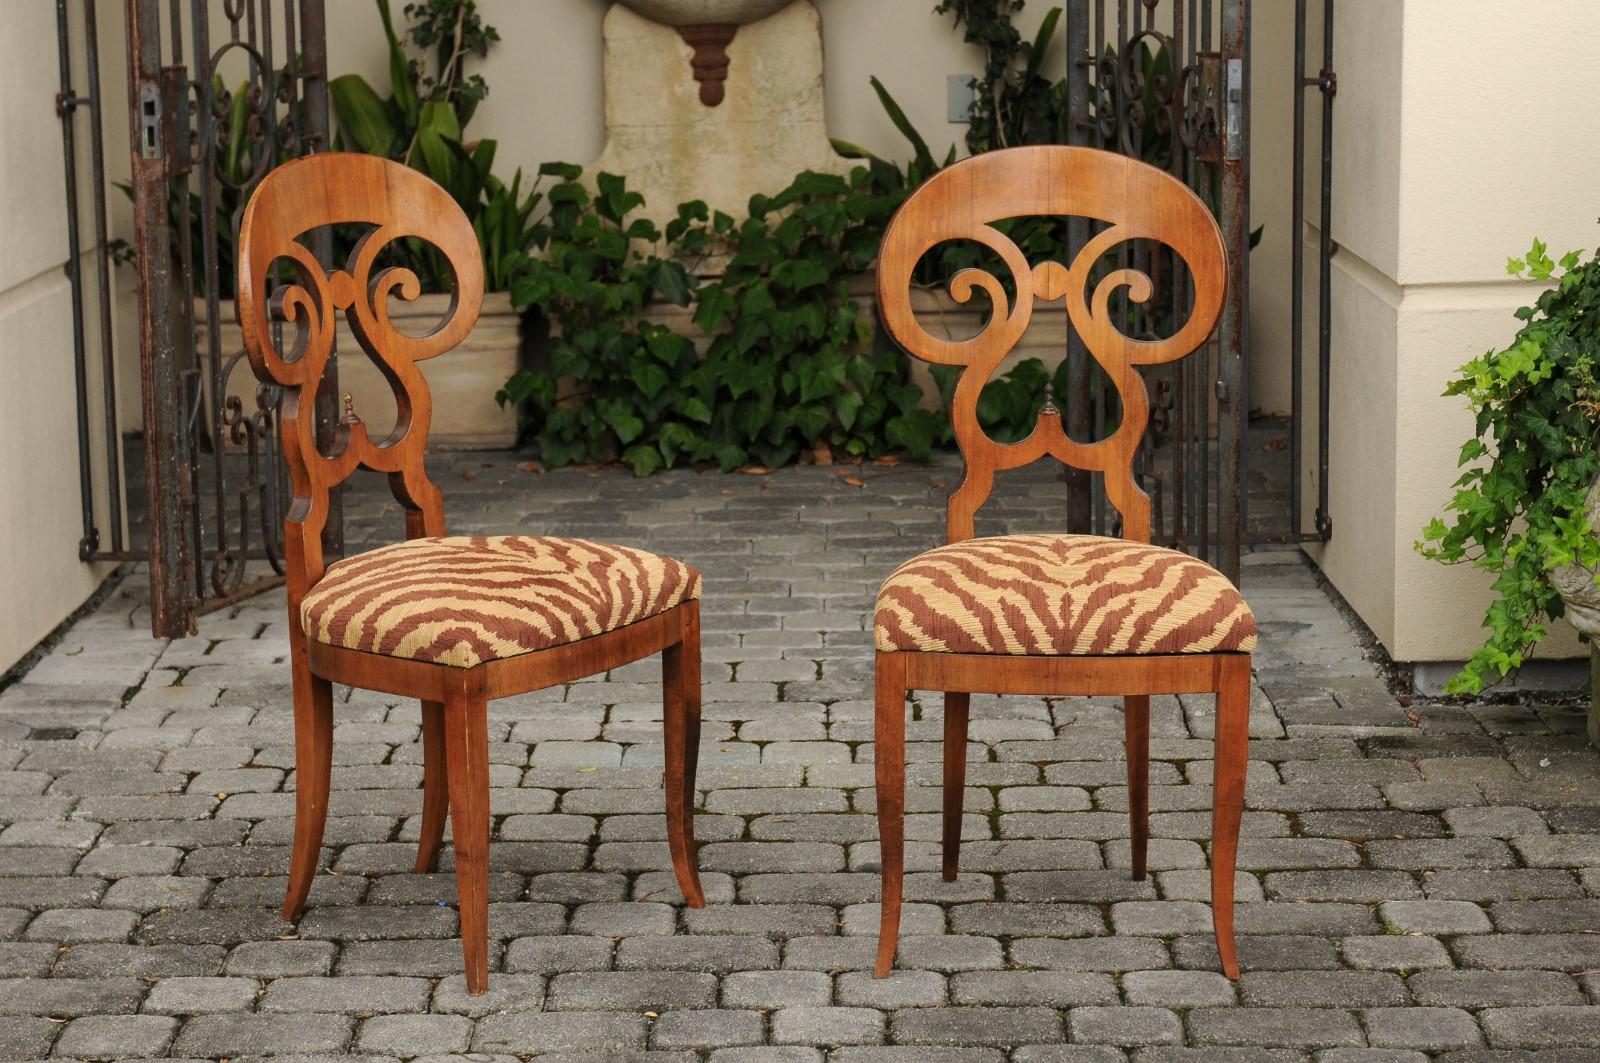 A set of four Italian walnut dining room side chairs from the early 20th century, with carved backs and animal print fabrics. Born in Italy during the early years of the 20th century, each of this set of side chairs features an elegant back, with